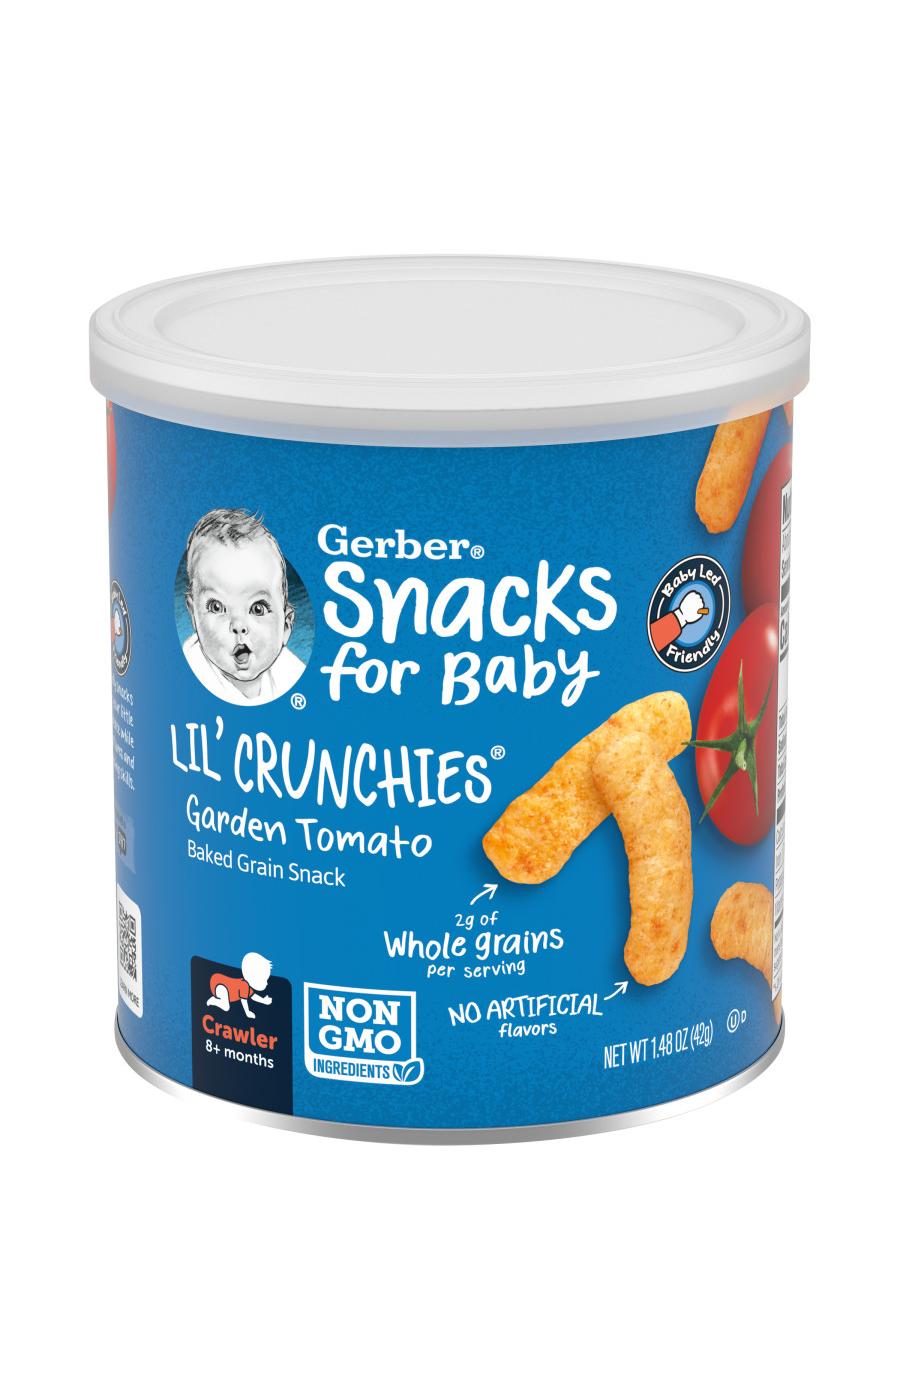 Gerber Snacks for Baby Lil' Crunchies - Garden Tomato; image 1 of 8